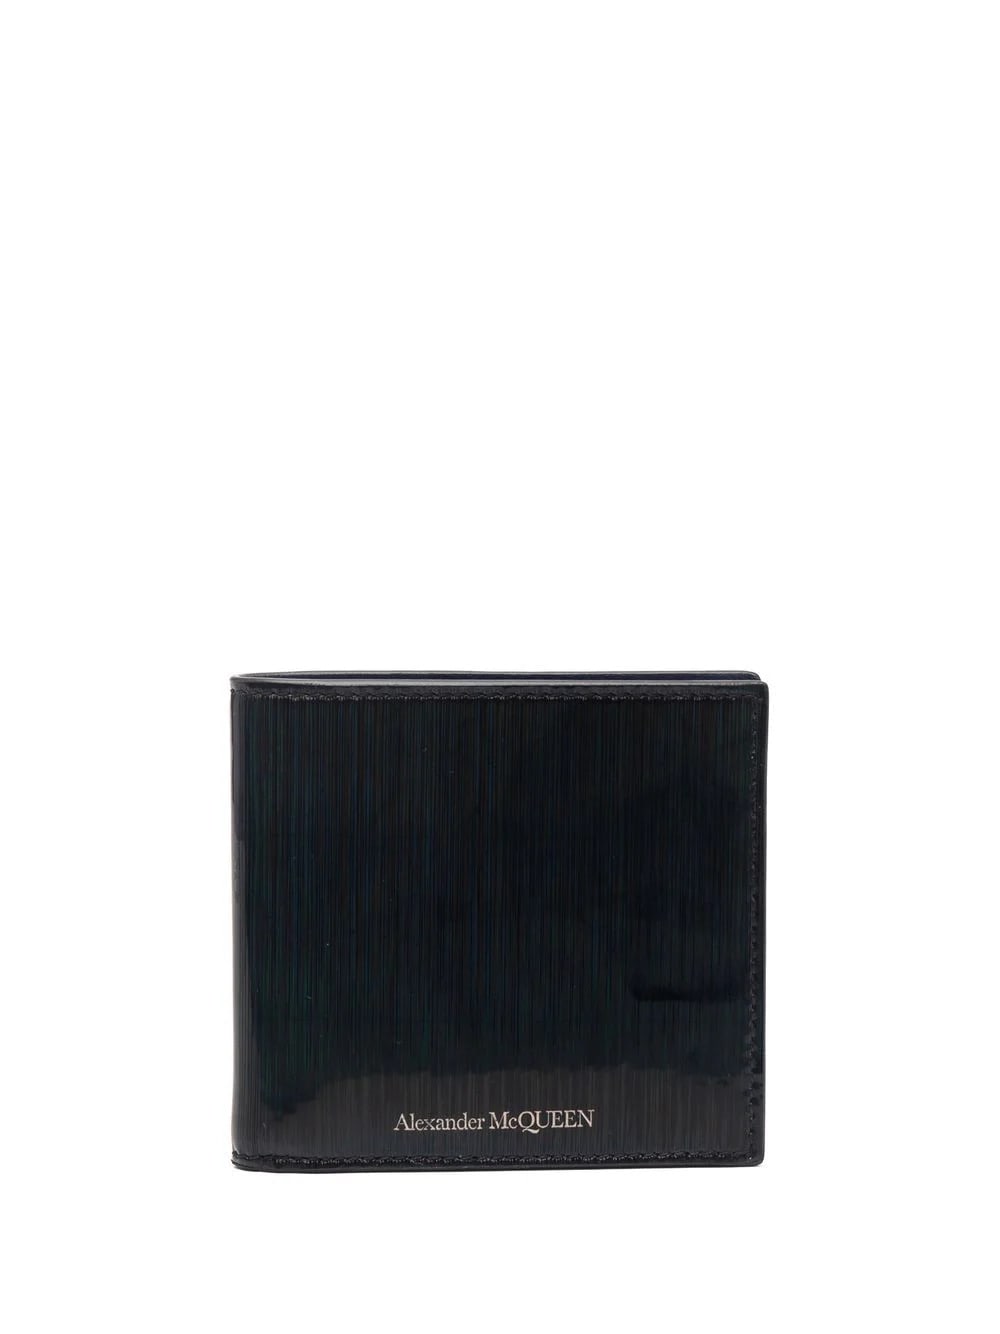 Alexander McQueen Man Wallet In Black Glossy Leather With Multicolor Effect And Silver Logo